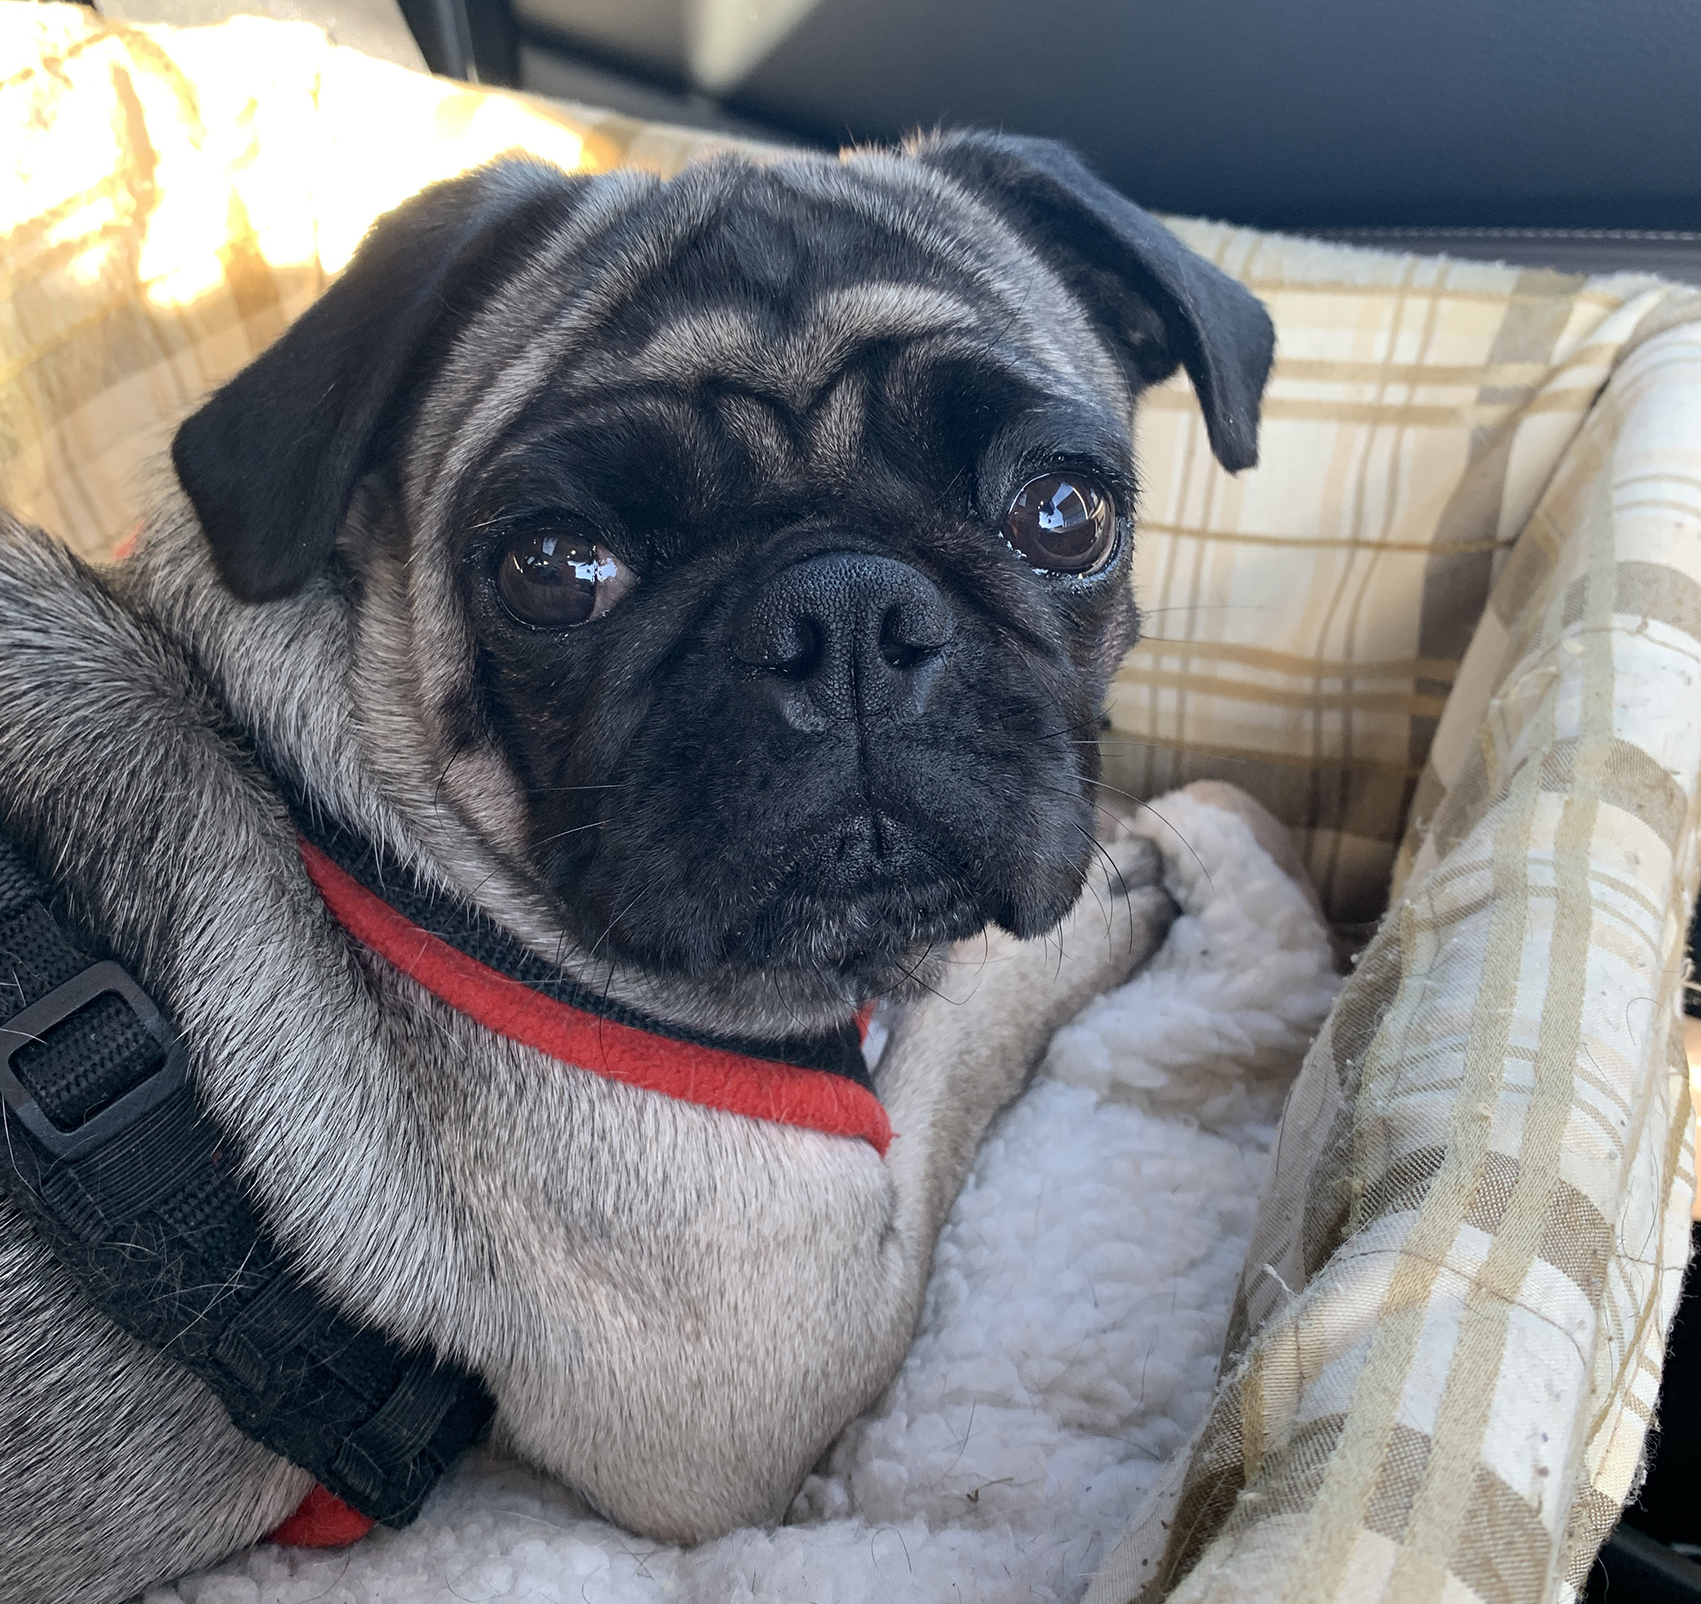 Wheels for Charlie - image Wilma on https://pugprotectiontrust.org